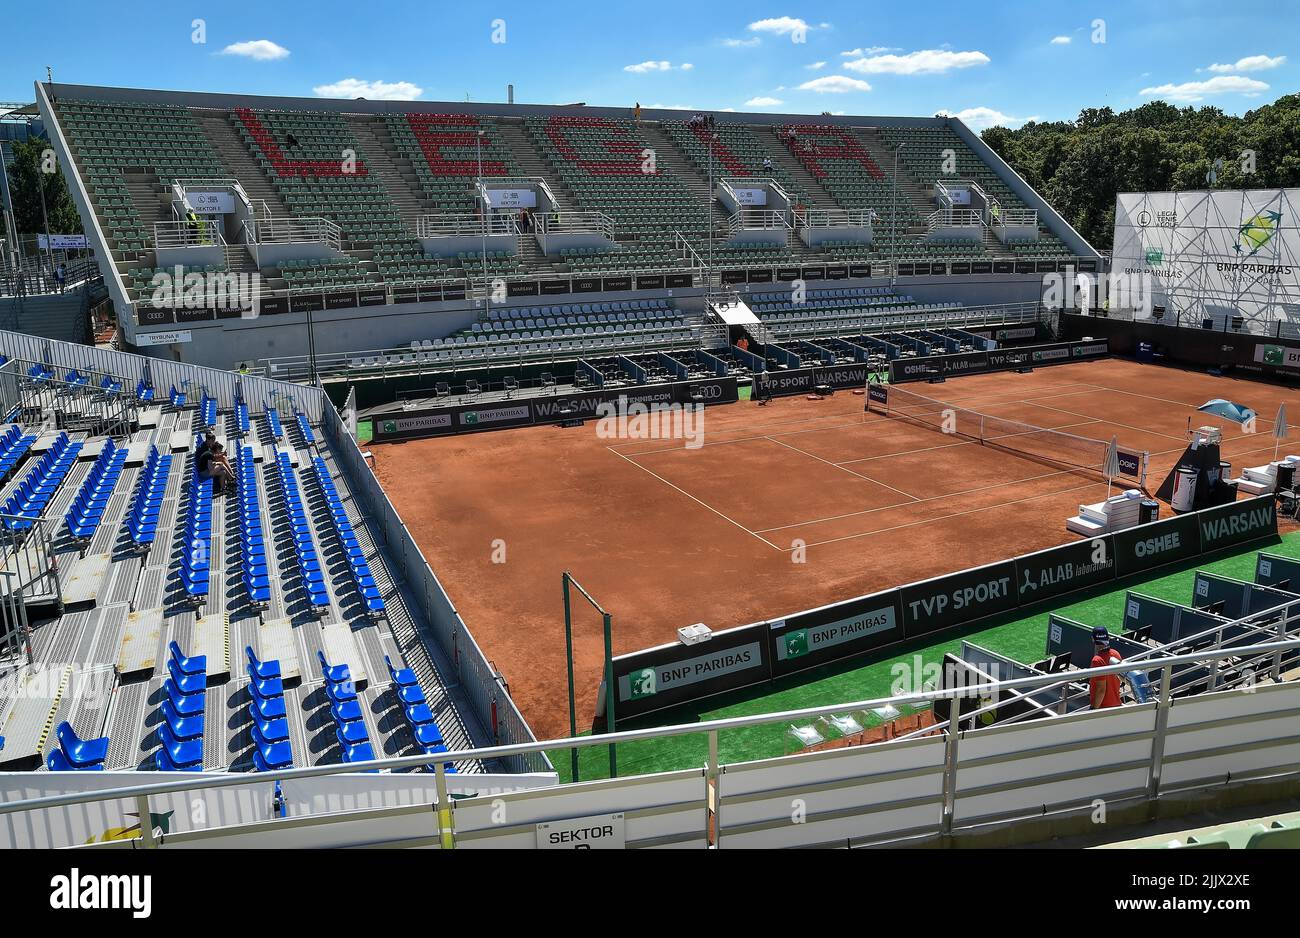 WARSAW, POLAND - JULY 28: General view of Legia Tenis and Golf during the  WTA250 BNP Paribas